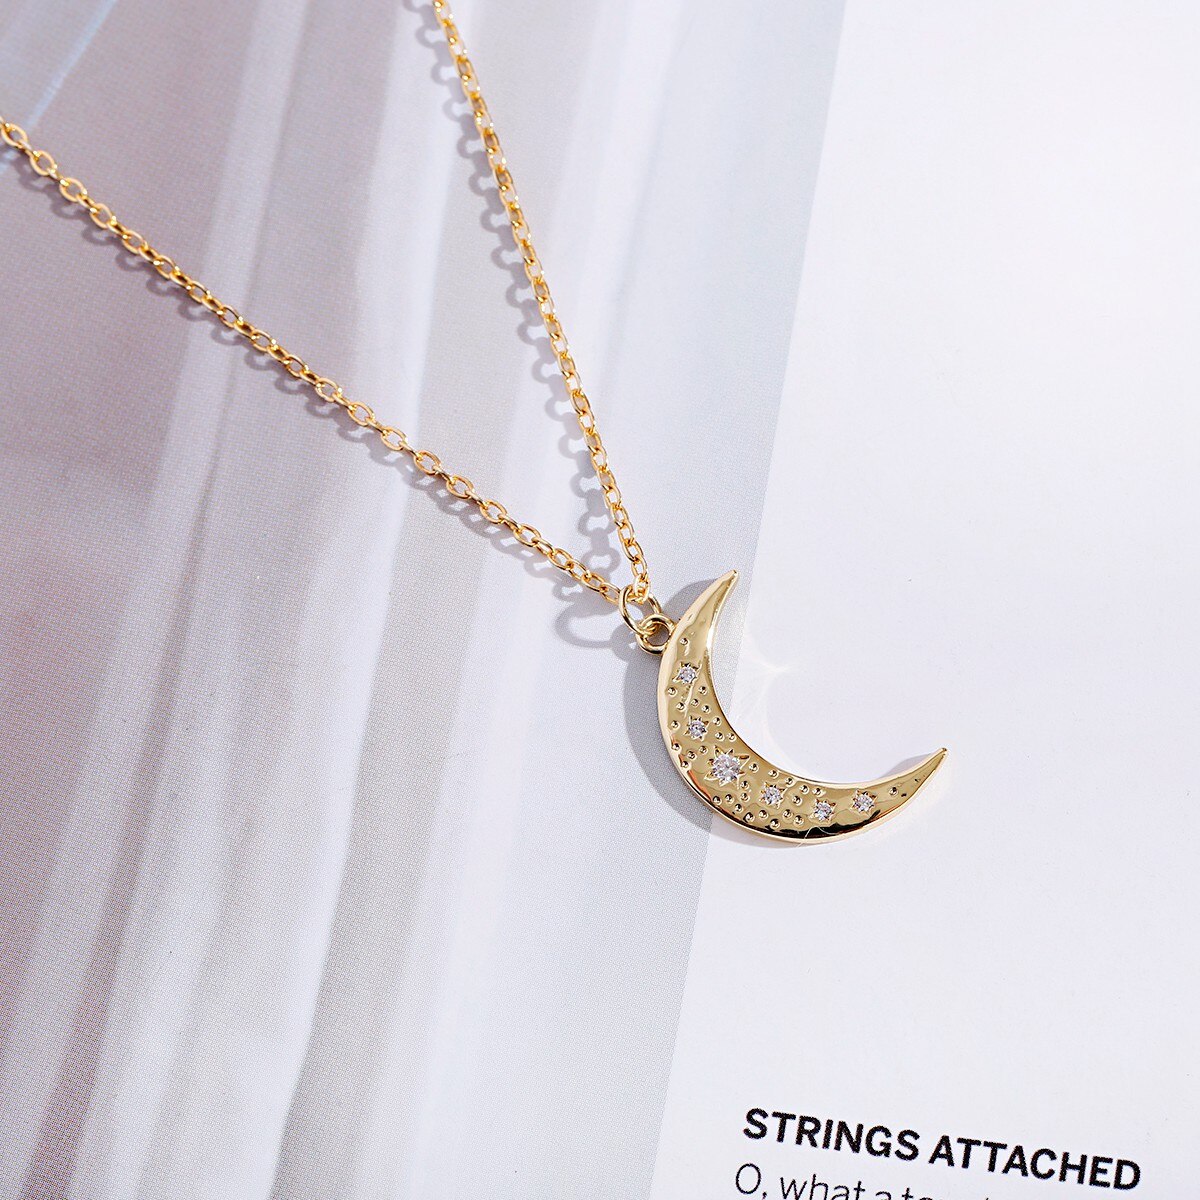 Fashion-Red-Heart-Necklace-Gold-Color-Long-Chain-Choker-Copper-Charm-Moon-Choker-Party-Necklaces-Gif-3256801886921271-6